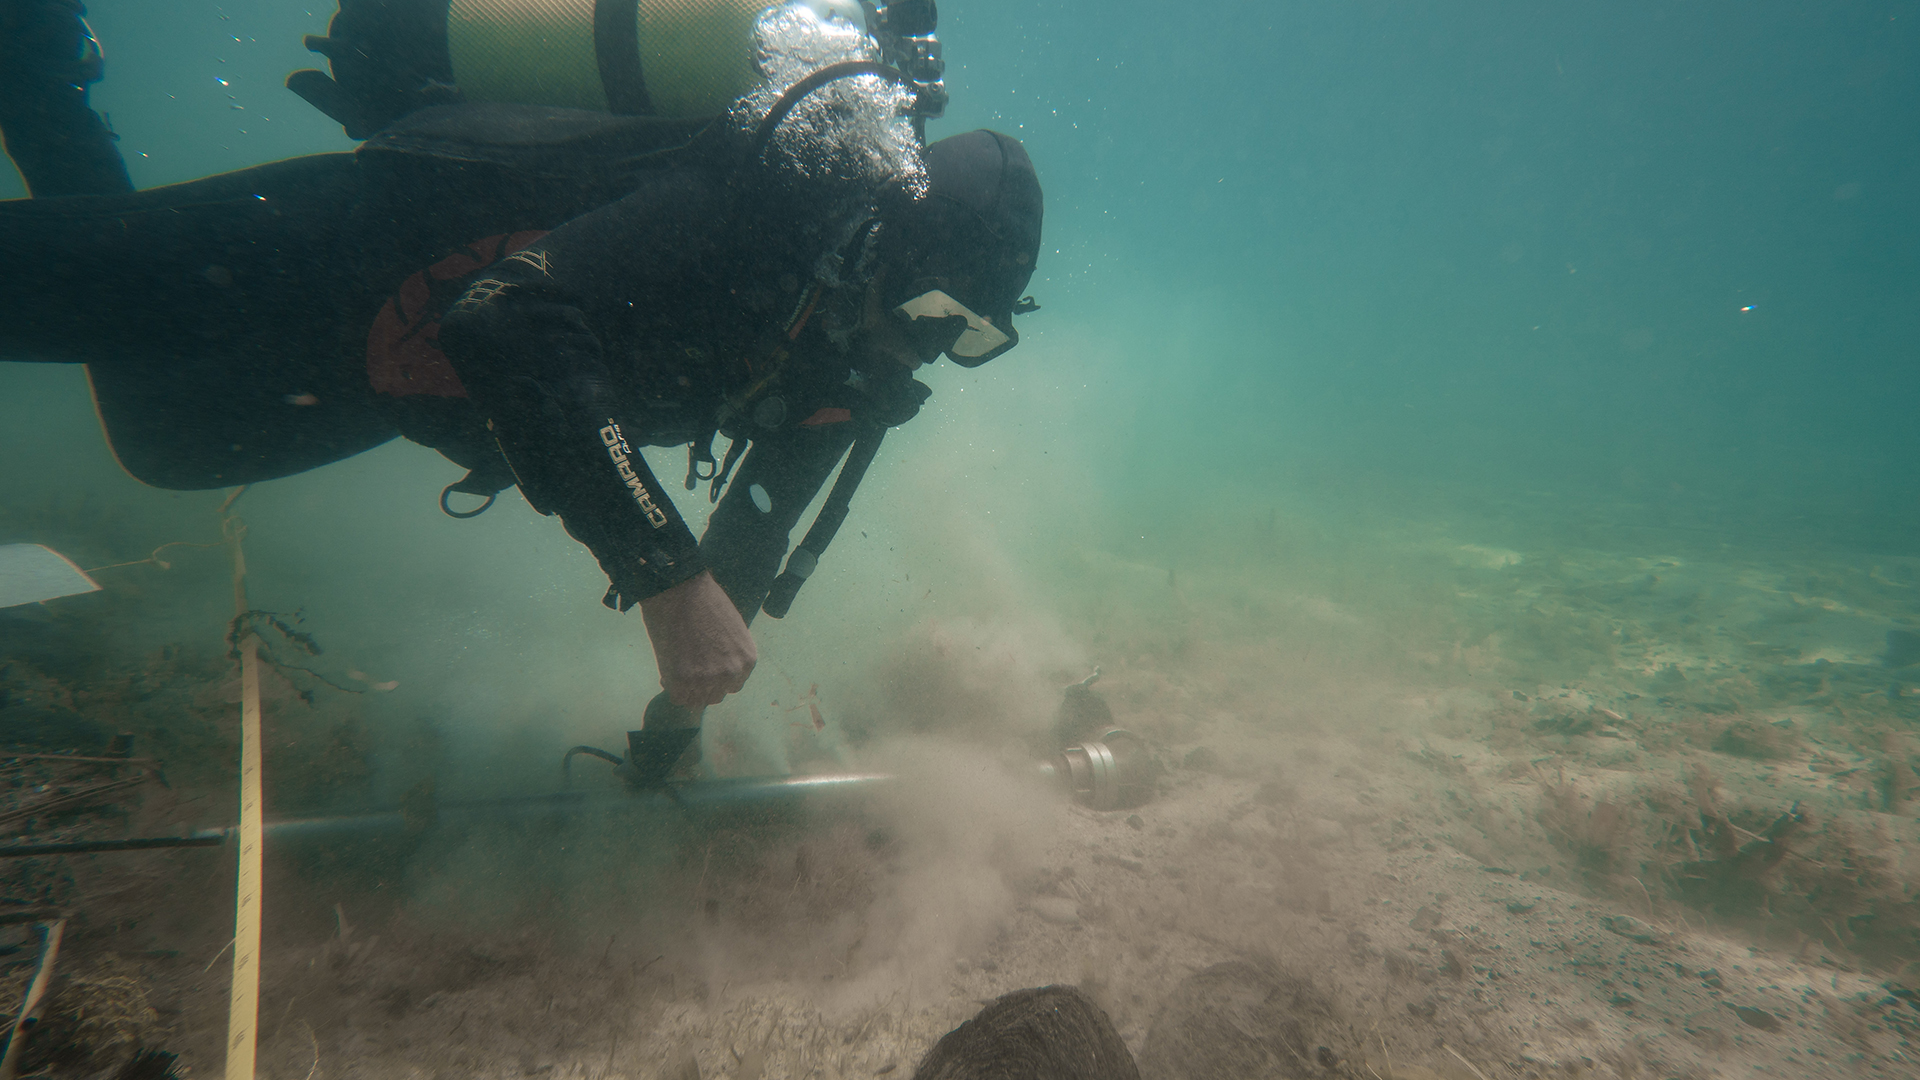 A diver carries an excavation tool near the bottom of the lake.